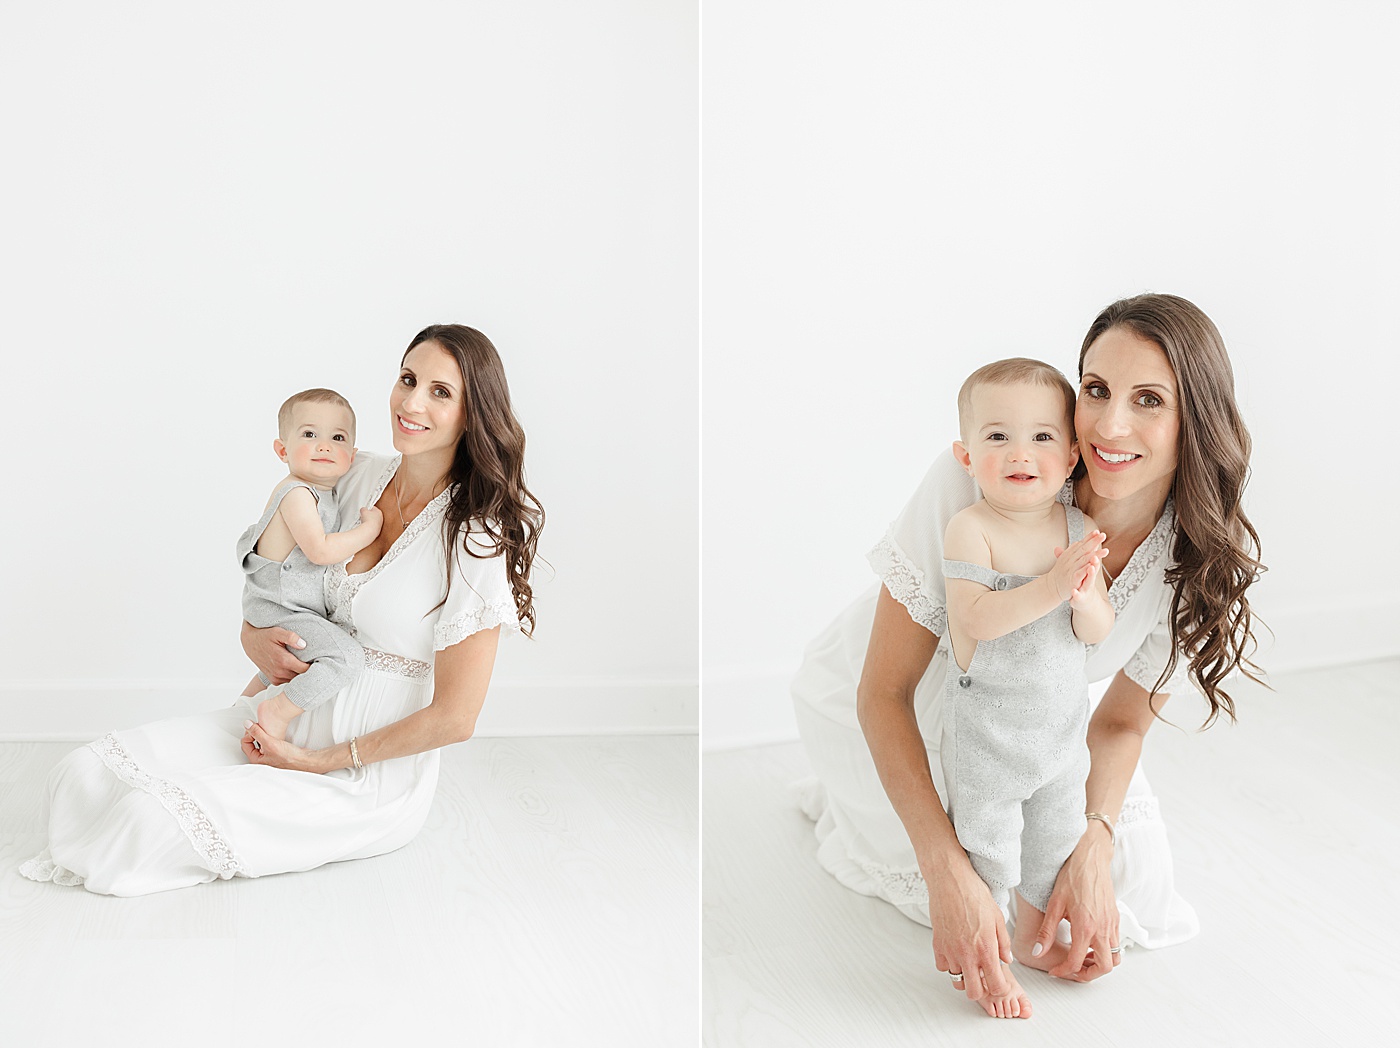 Mom and her one year old son | Kristin Wood Photography